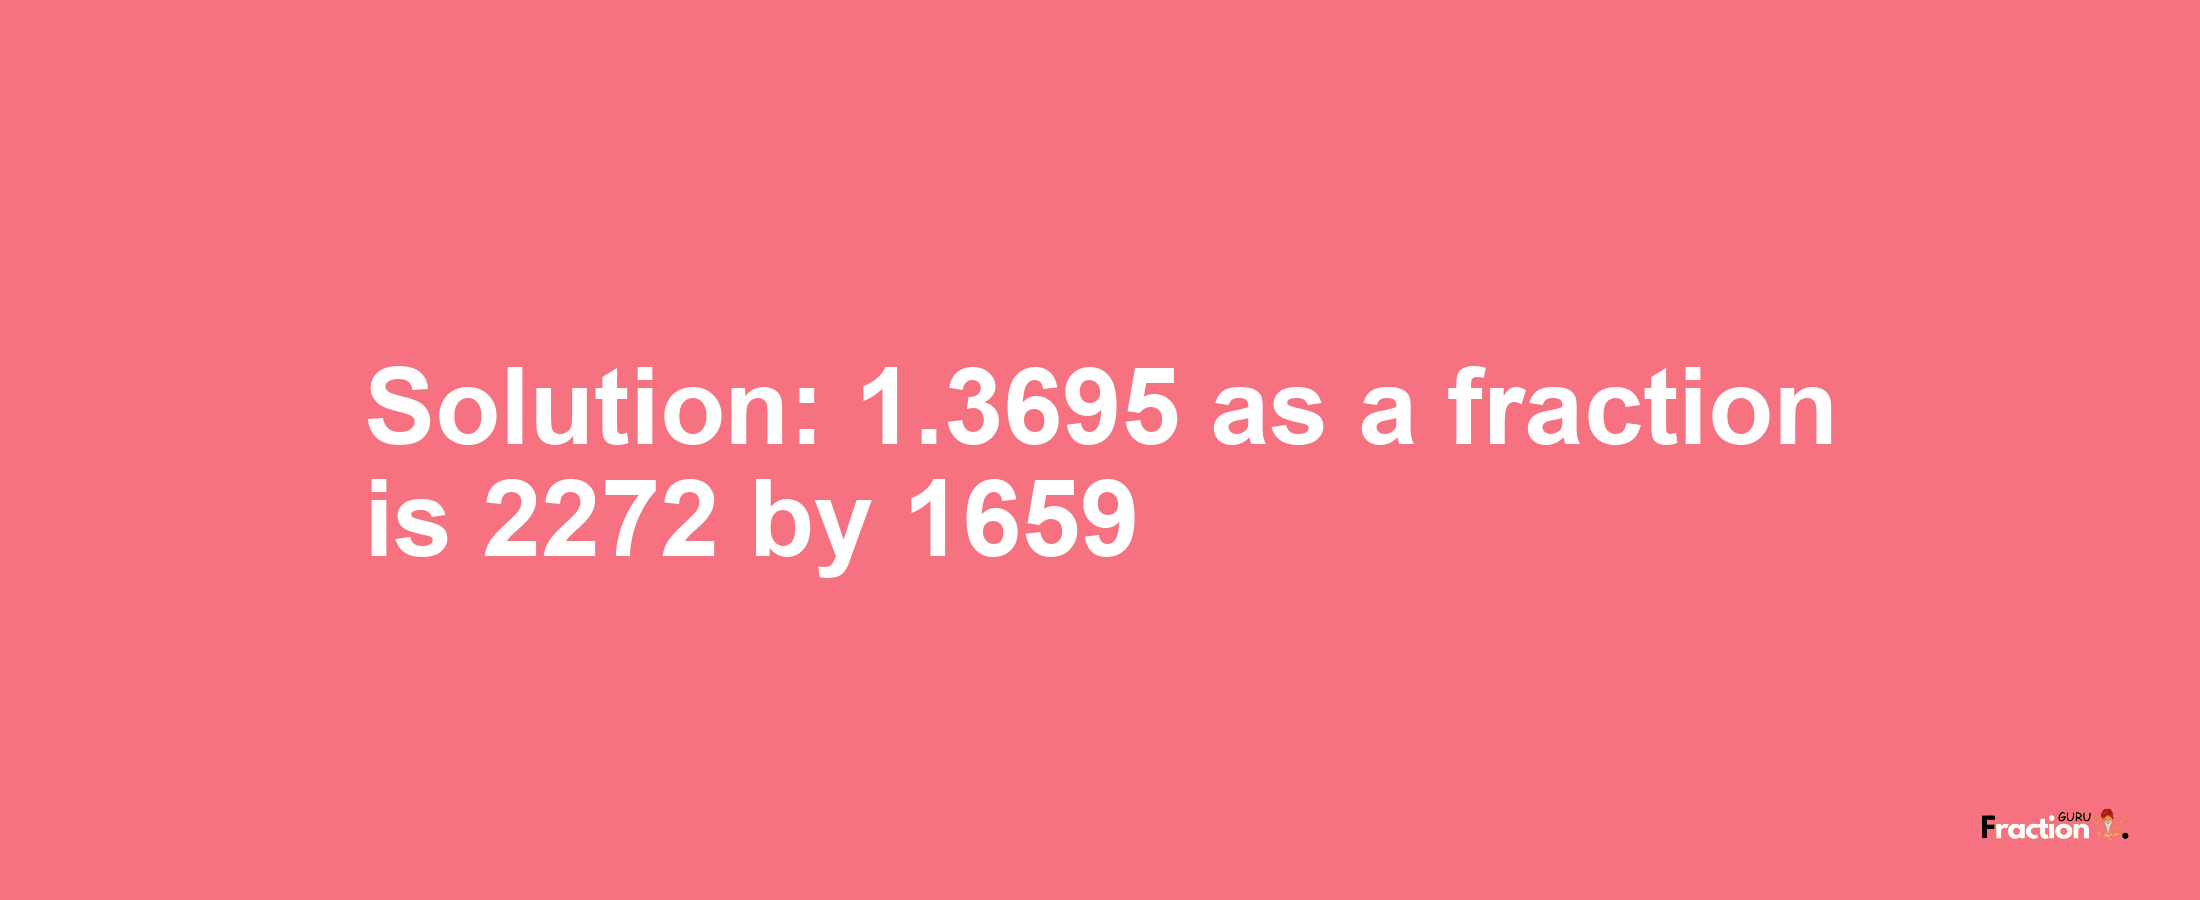 Solution:1.3695 as a fraction is 2272/1659